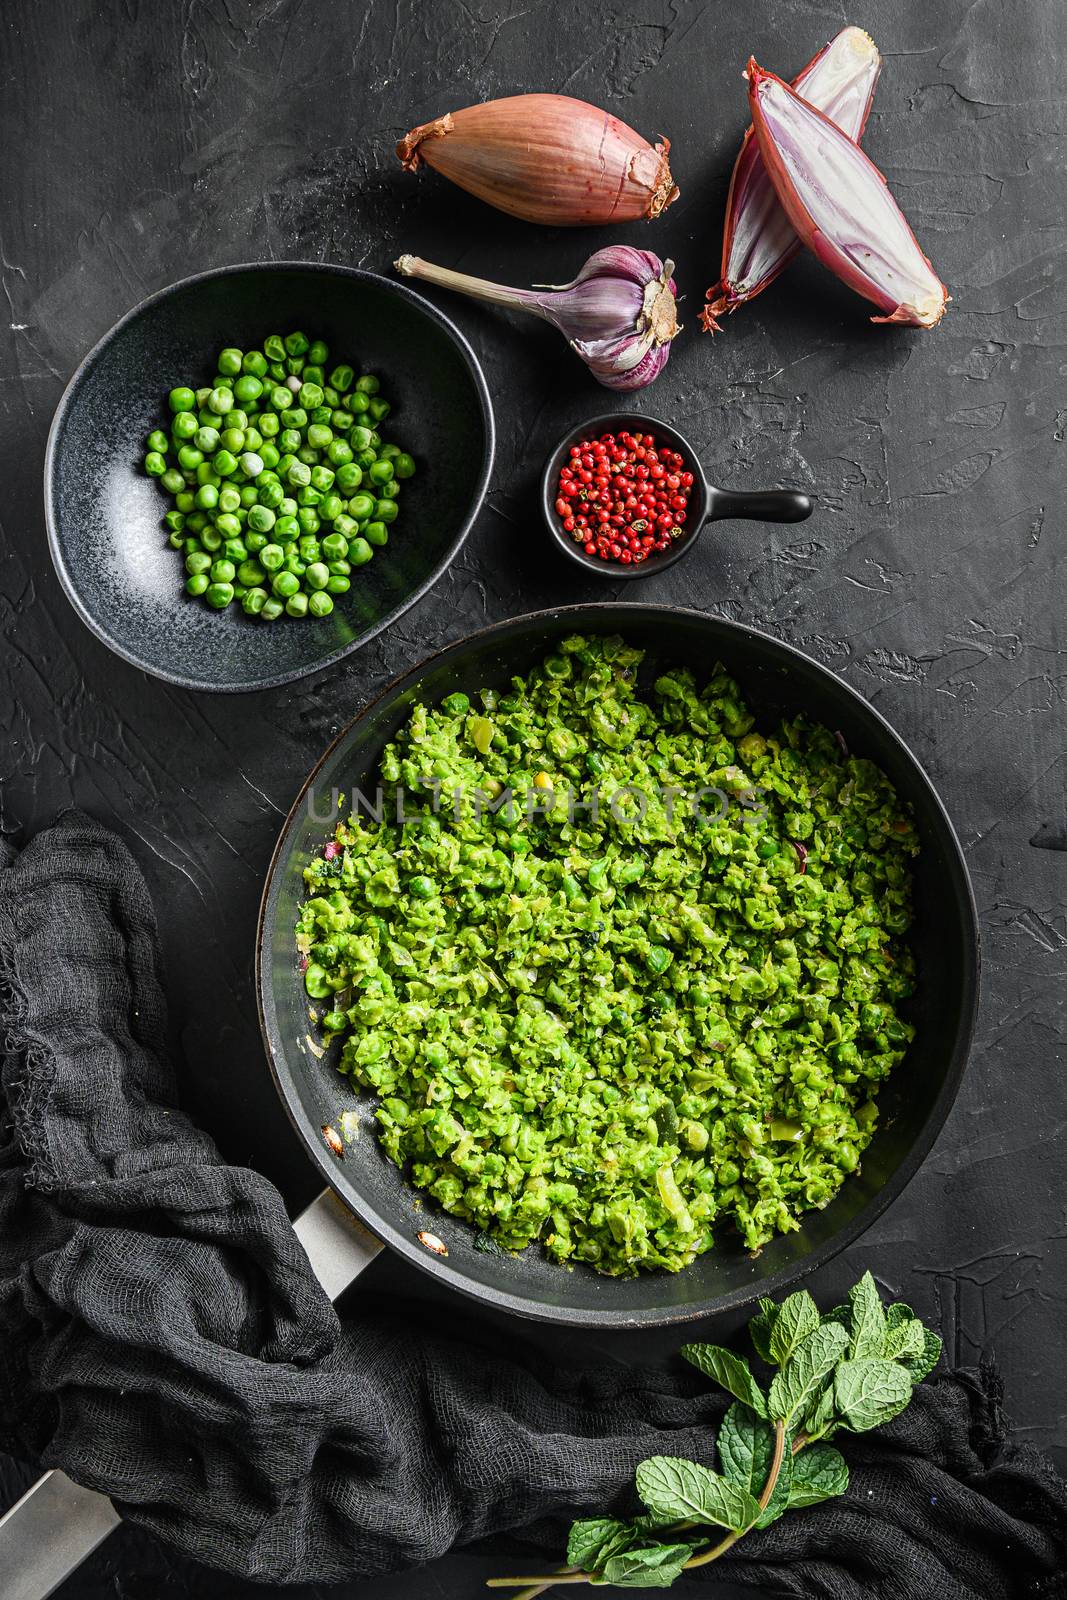 Mushy peas recipe cooked frying pan and peas in bowl with mint shallot pepper and salt over black stone surface top view organic keto food flat lay overhead photo.